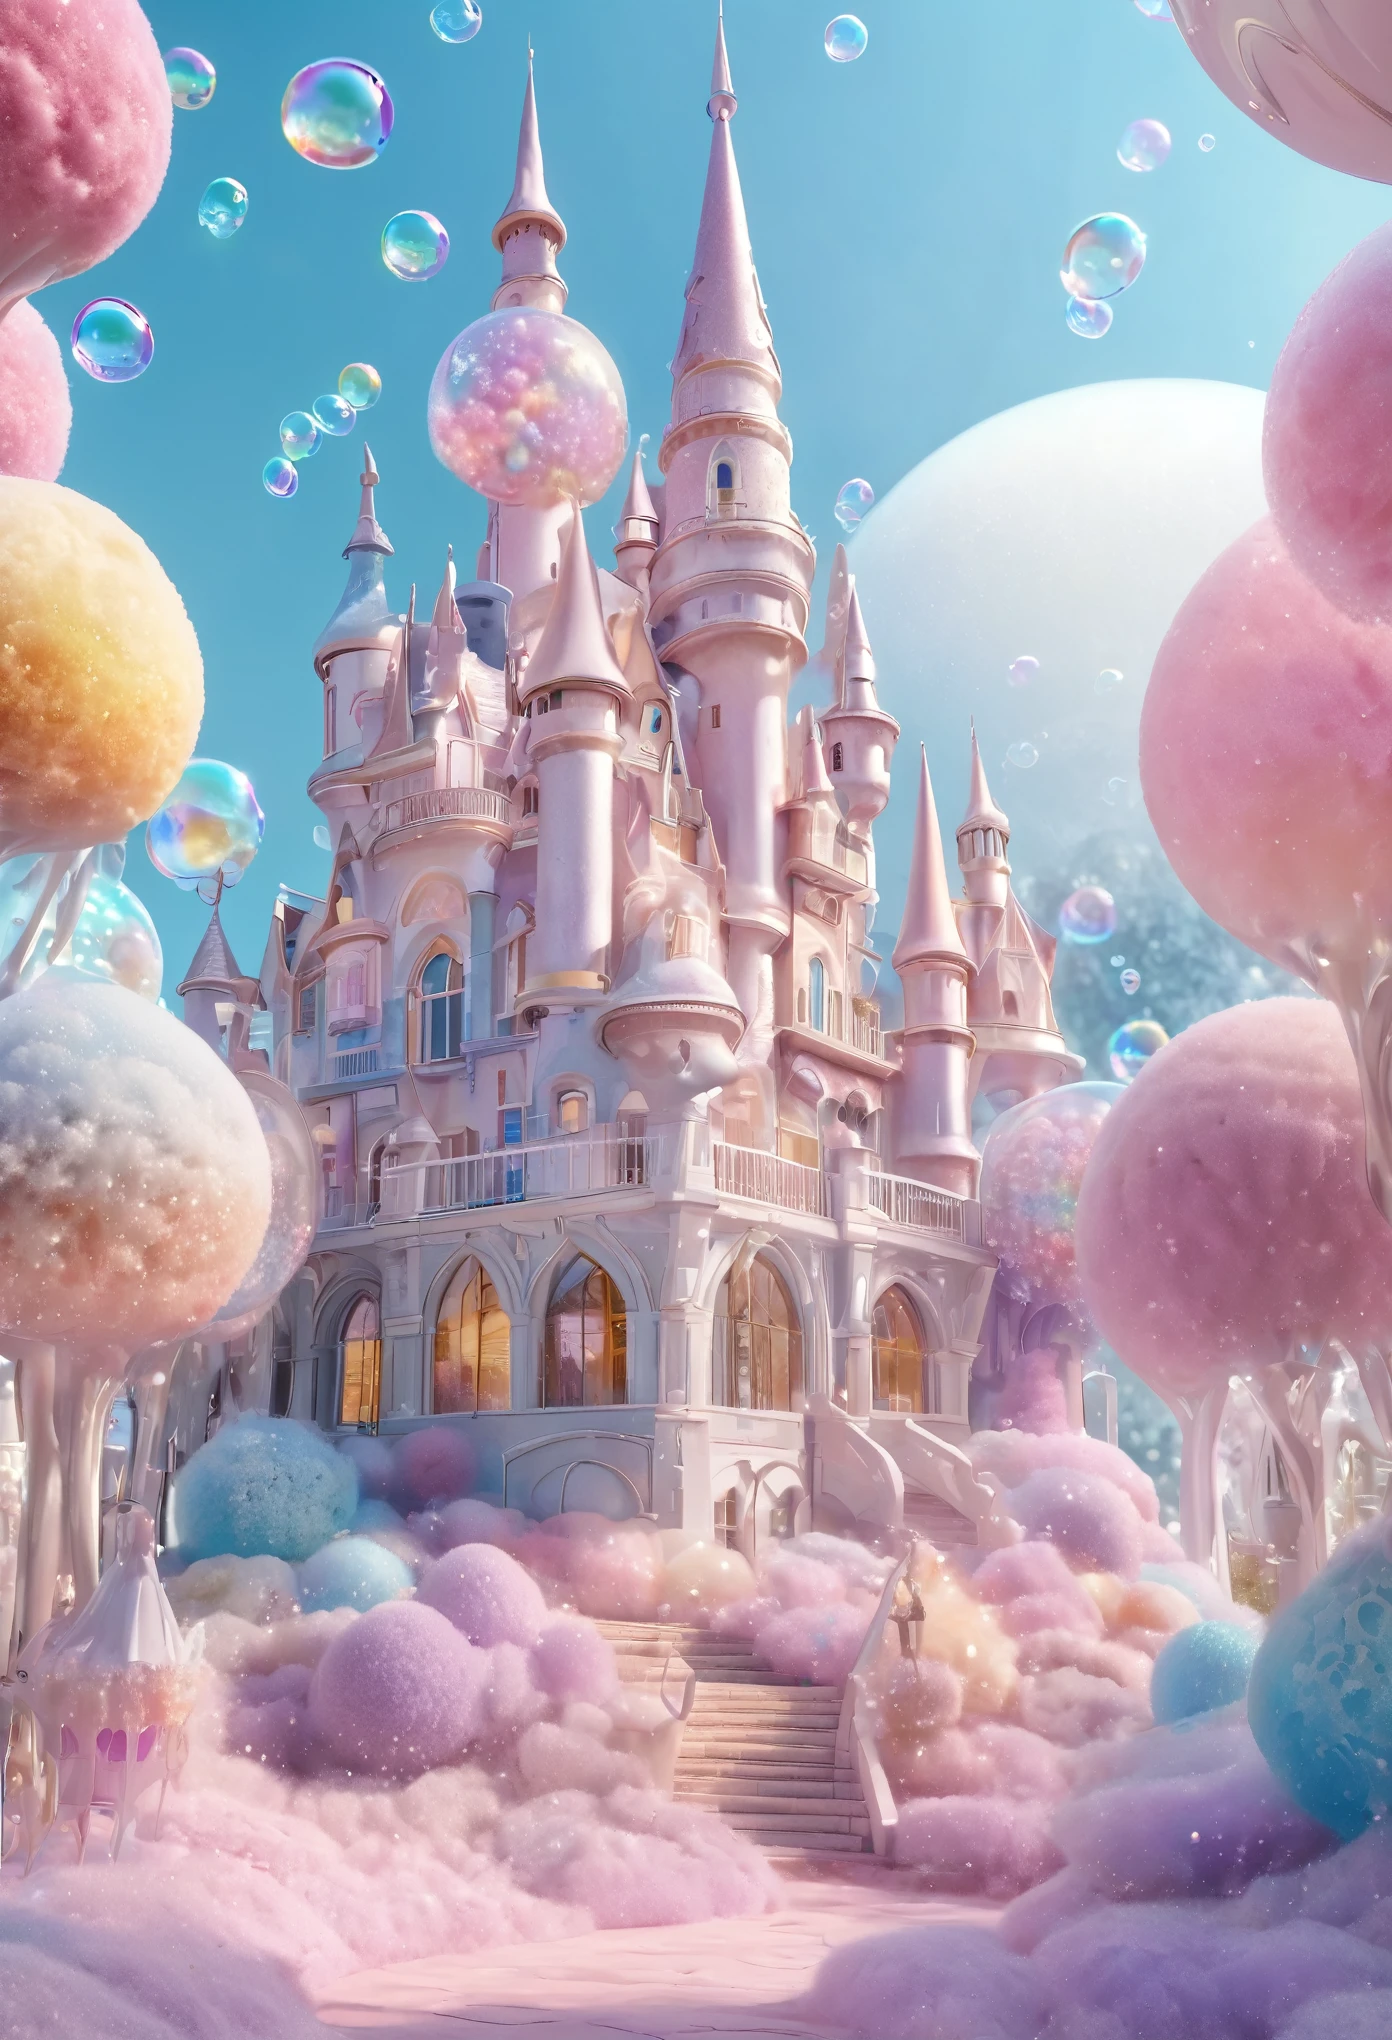 best quality, super fine, 16k, incredibly absurdres, extremely detailed, delicate and dynamic, dream world, mysterious castle filled with pastel-colored, fluffy, iridescent soap bubbles that look like sweets.